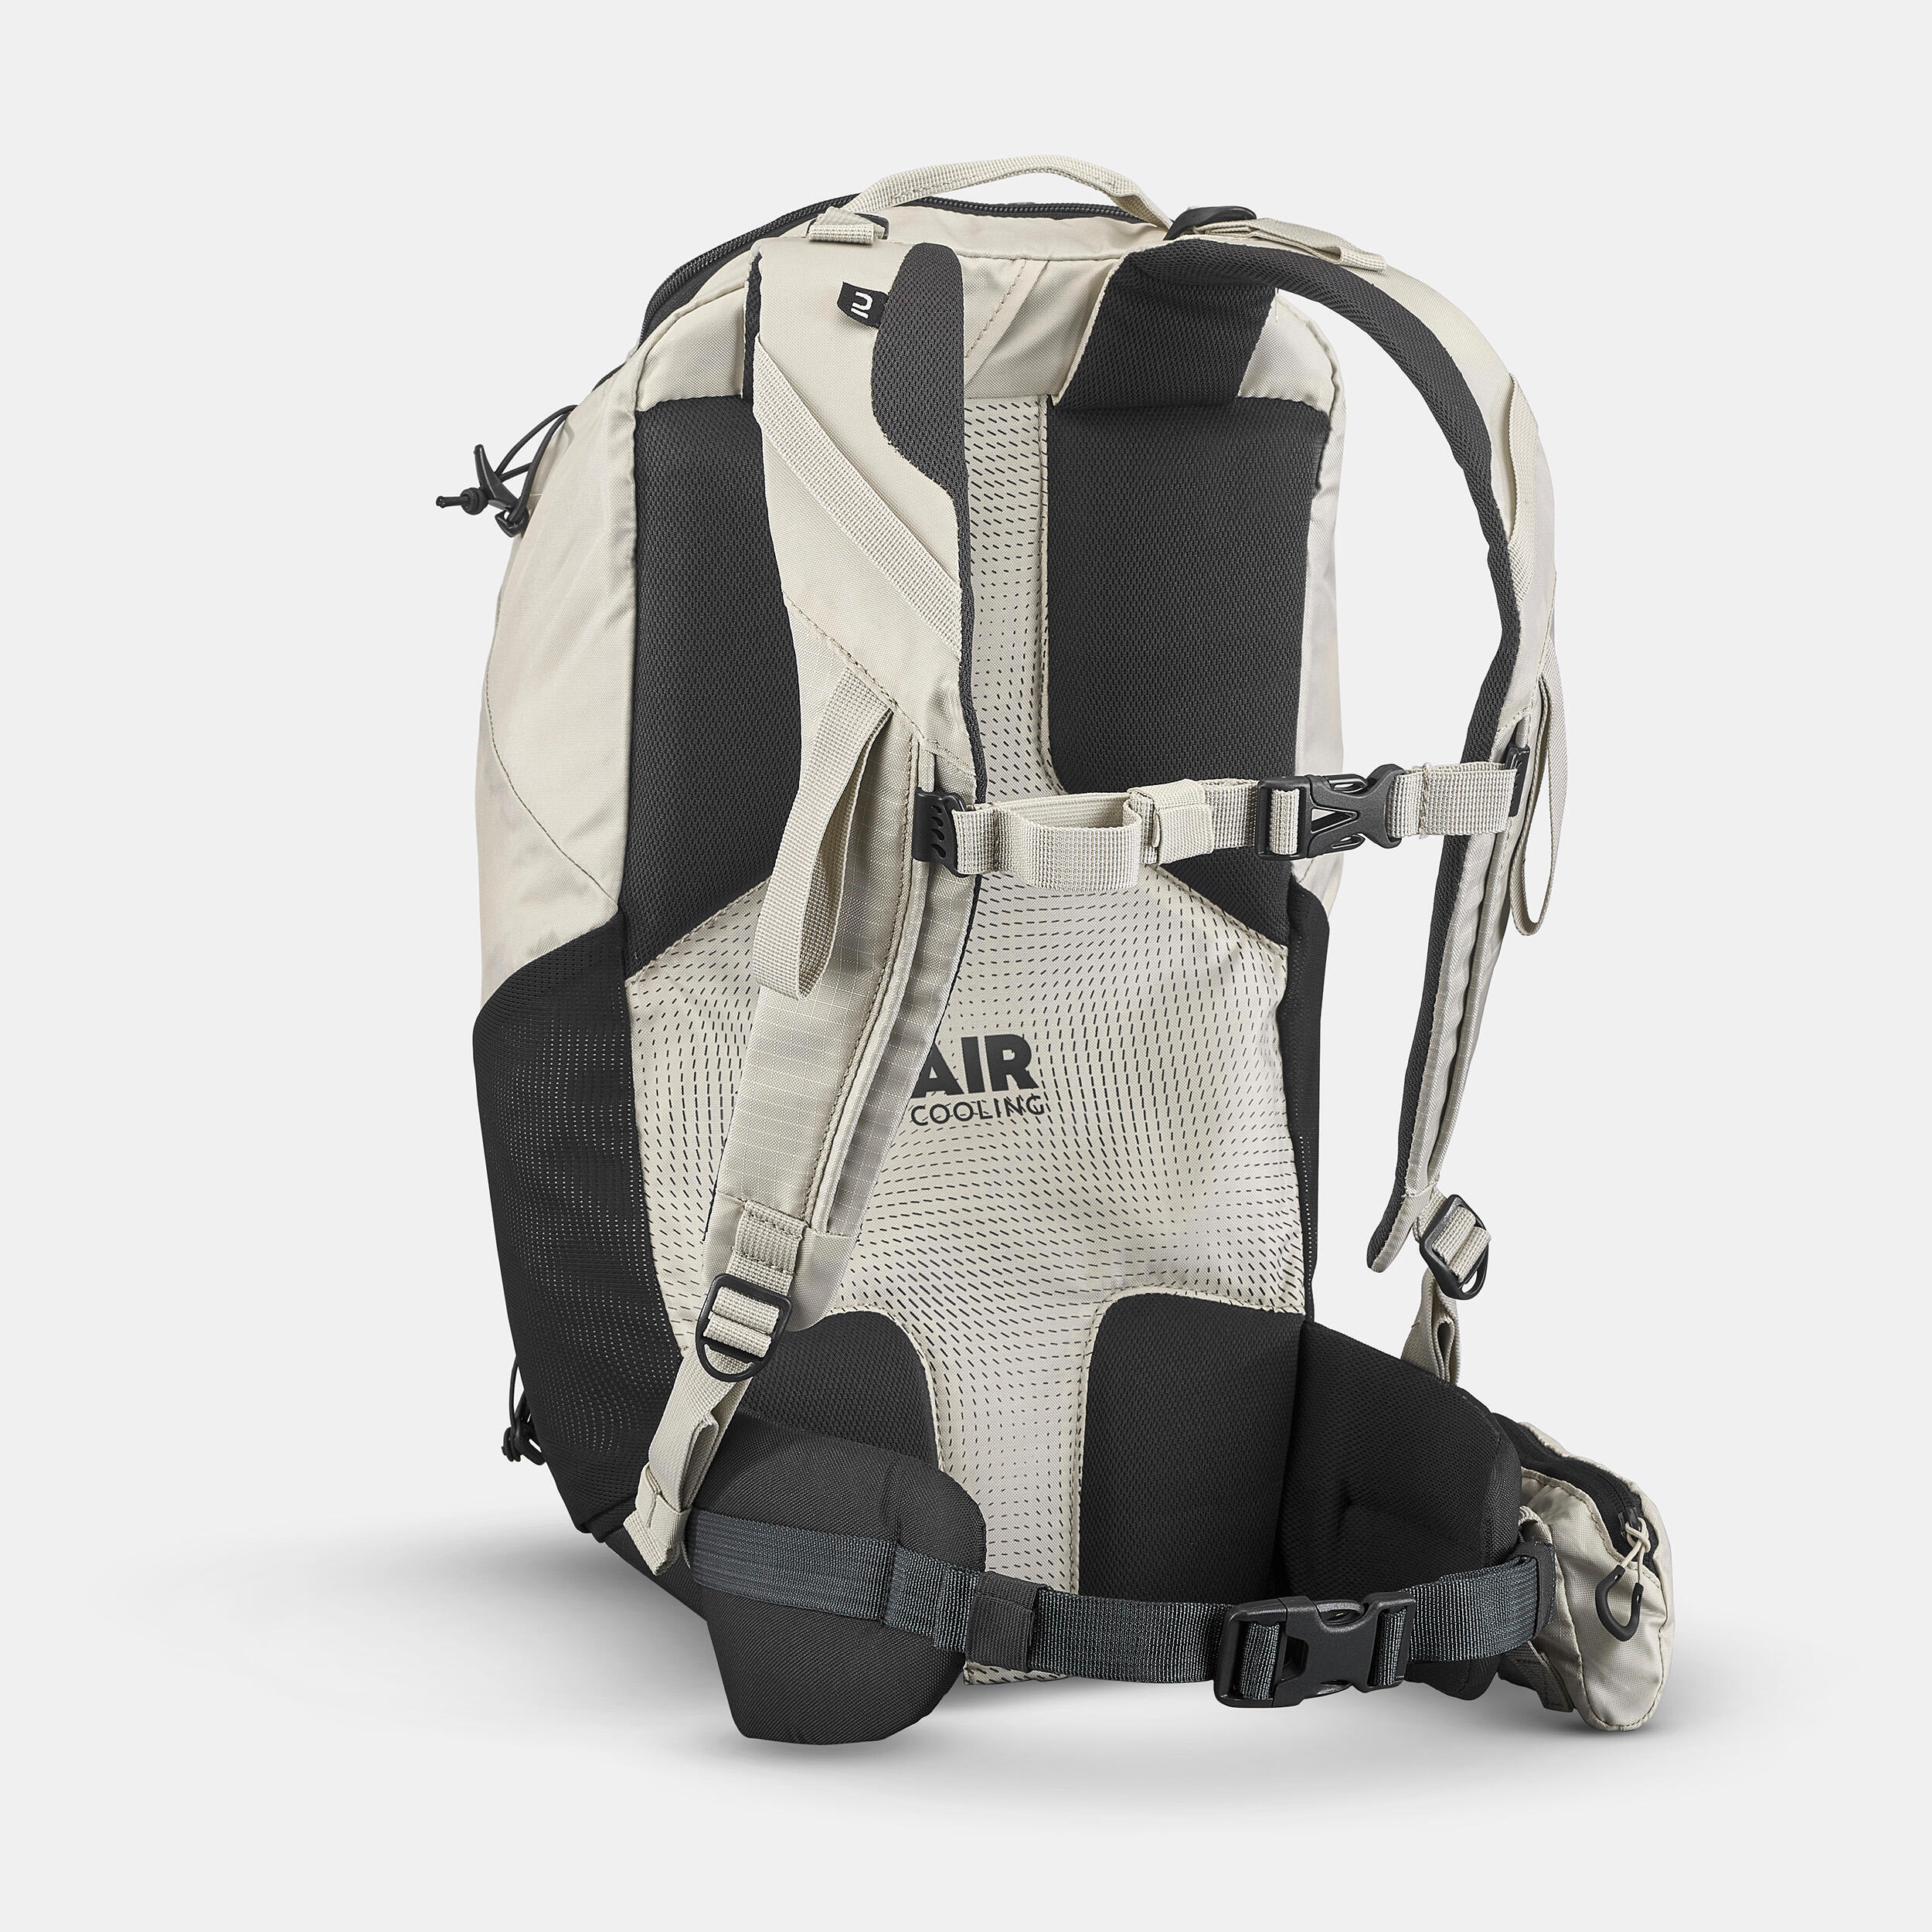 Mountain hiking backpack 20L - MH100 7/14